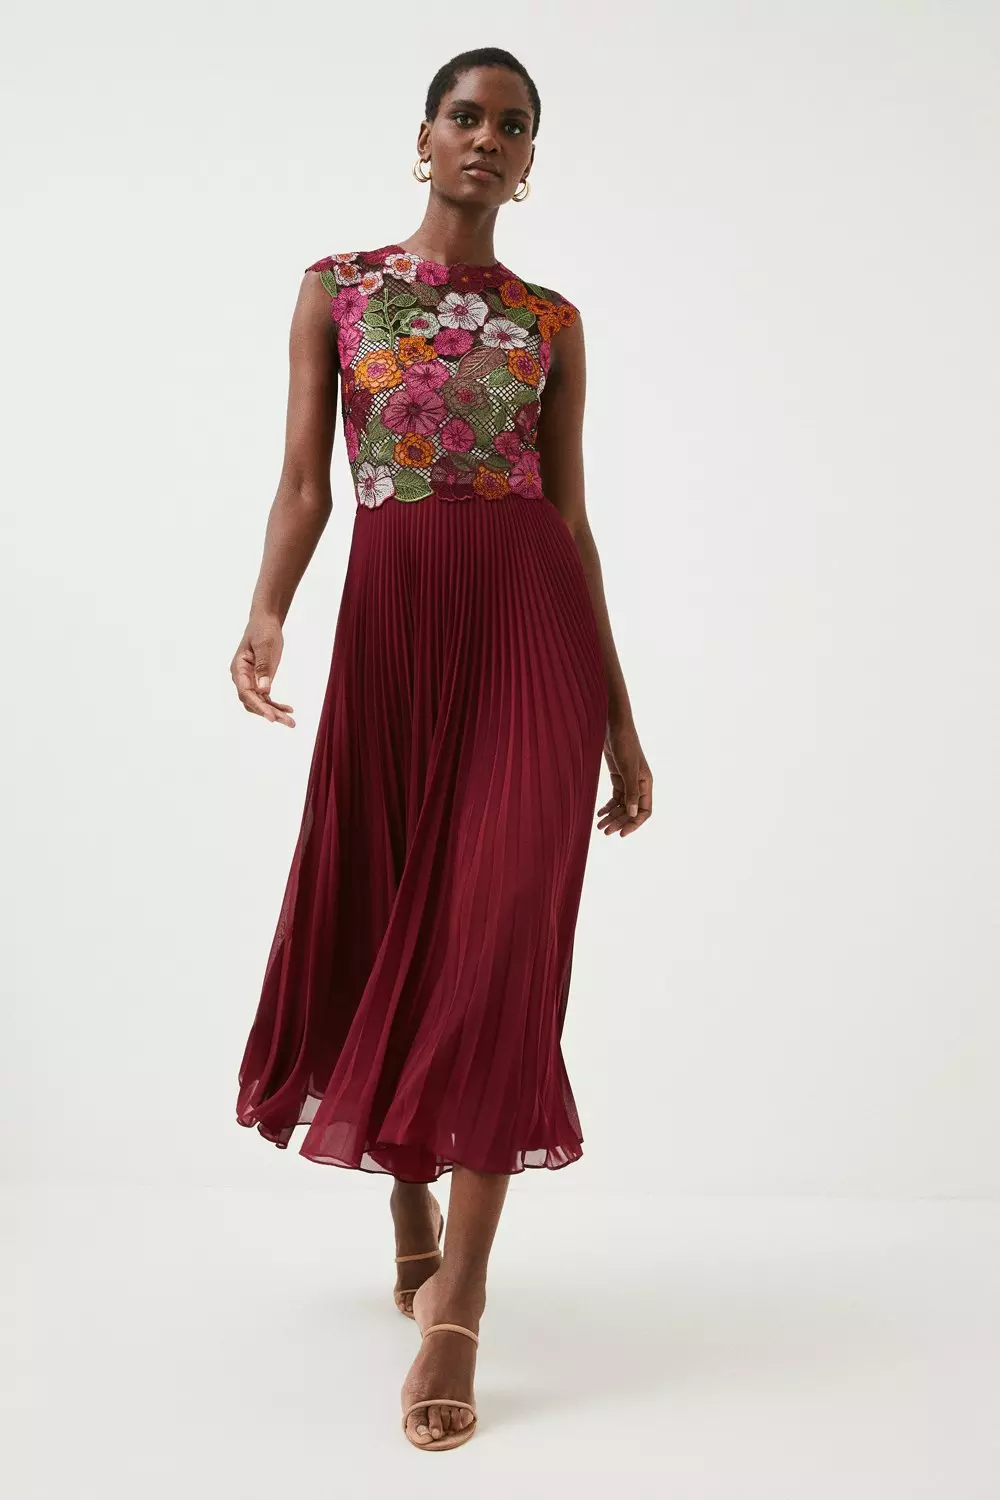 Floral Guipure Sleeveless Lace Dress